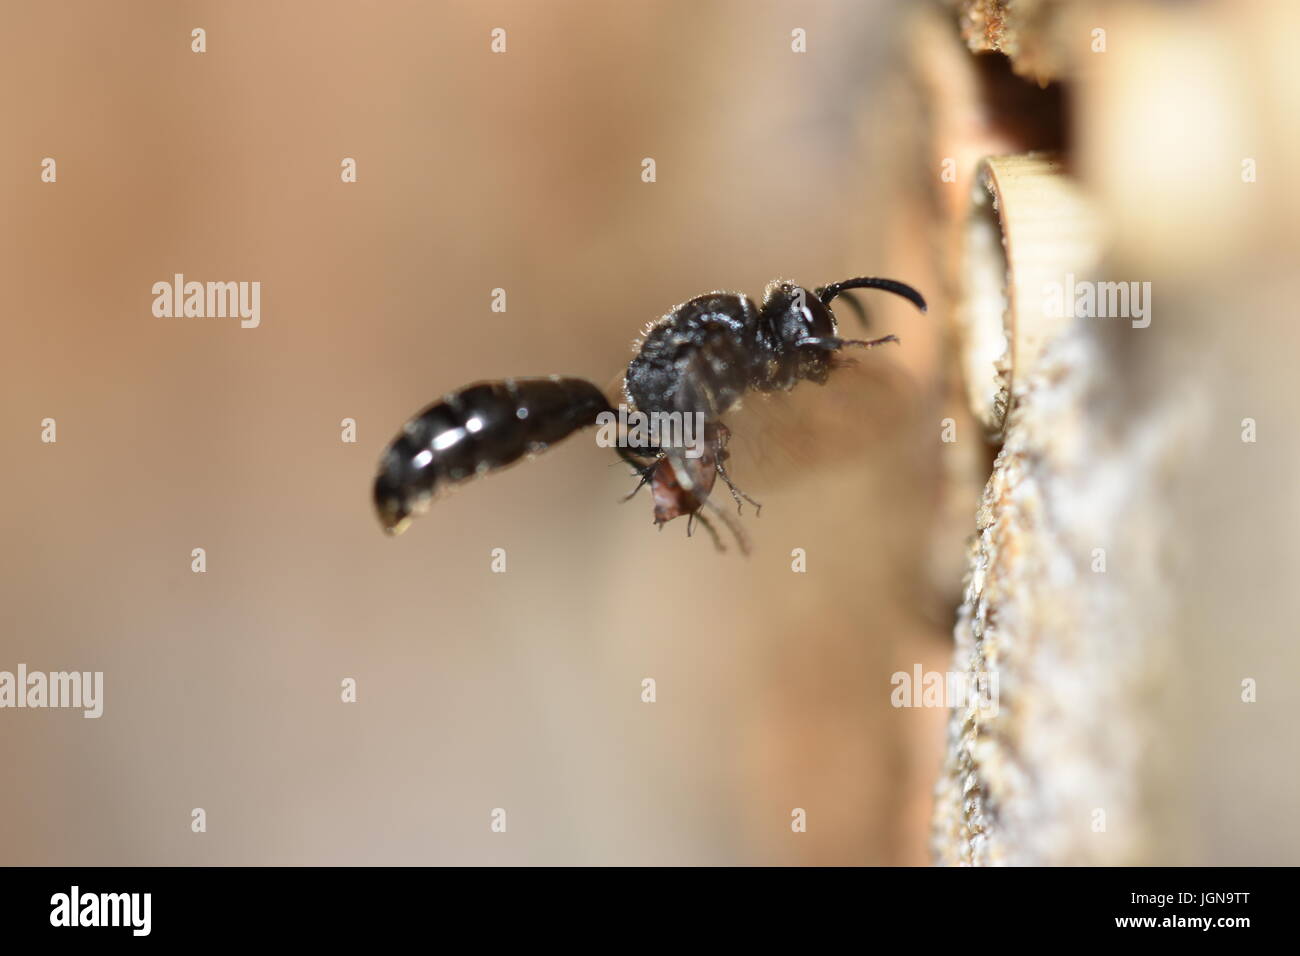 Crabronidae solitary wasp (Psenulus fuscipennis) bringing aphids to its nest in a hollow reed stalk. in flight with prey, approaching an insect hotel. Stock Photo